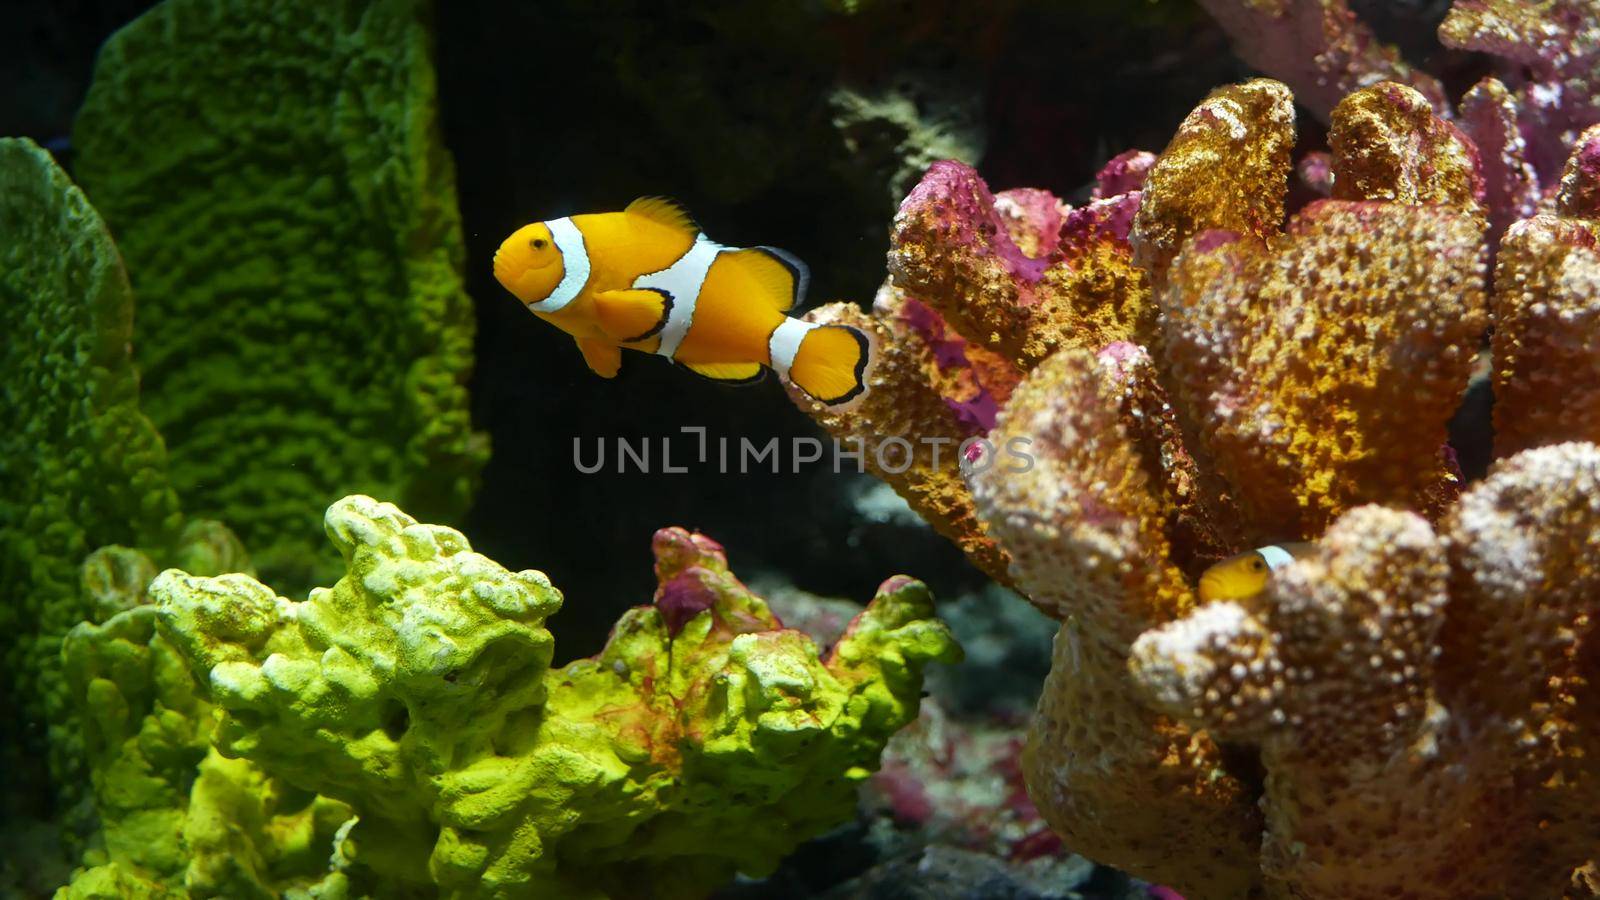 Clownfish near coral in aquarium. Small clownfish swimming near various majestic corals on black background in aquarium water. Marine underwater tropical exotic life natural background.